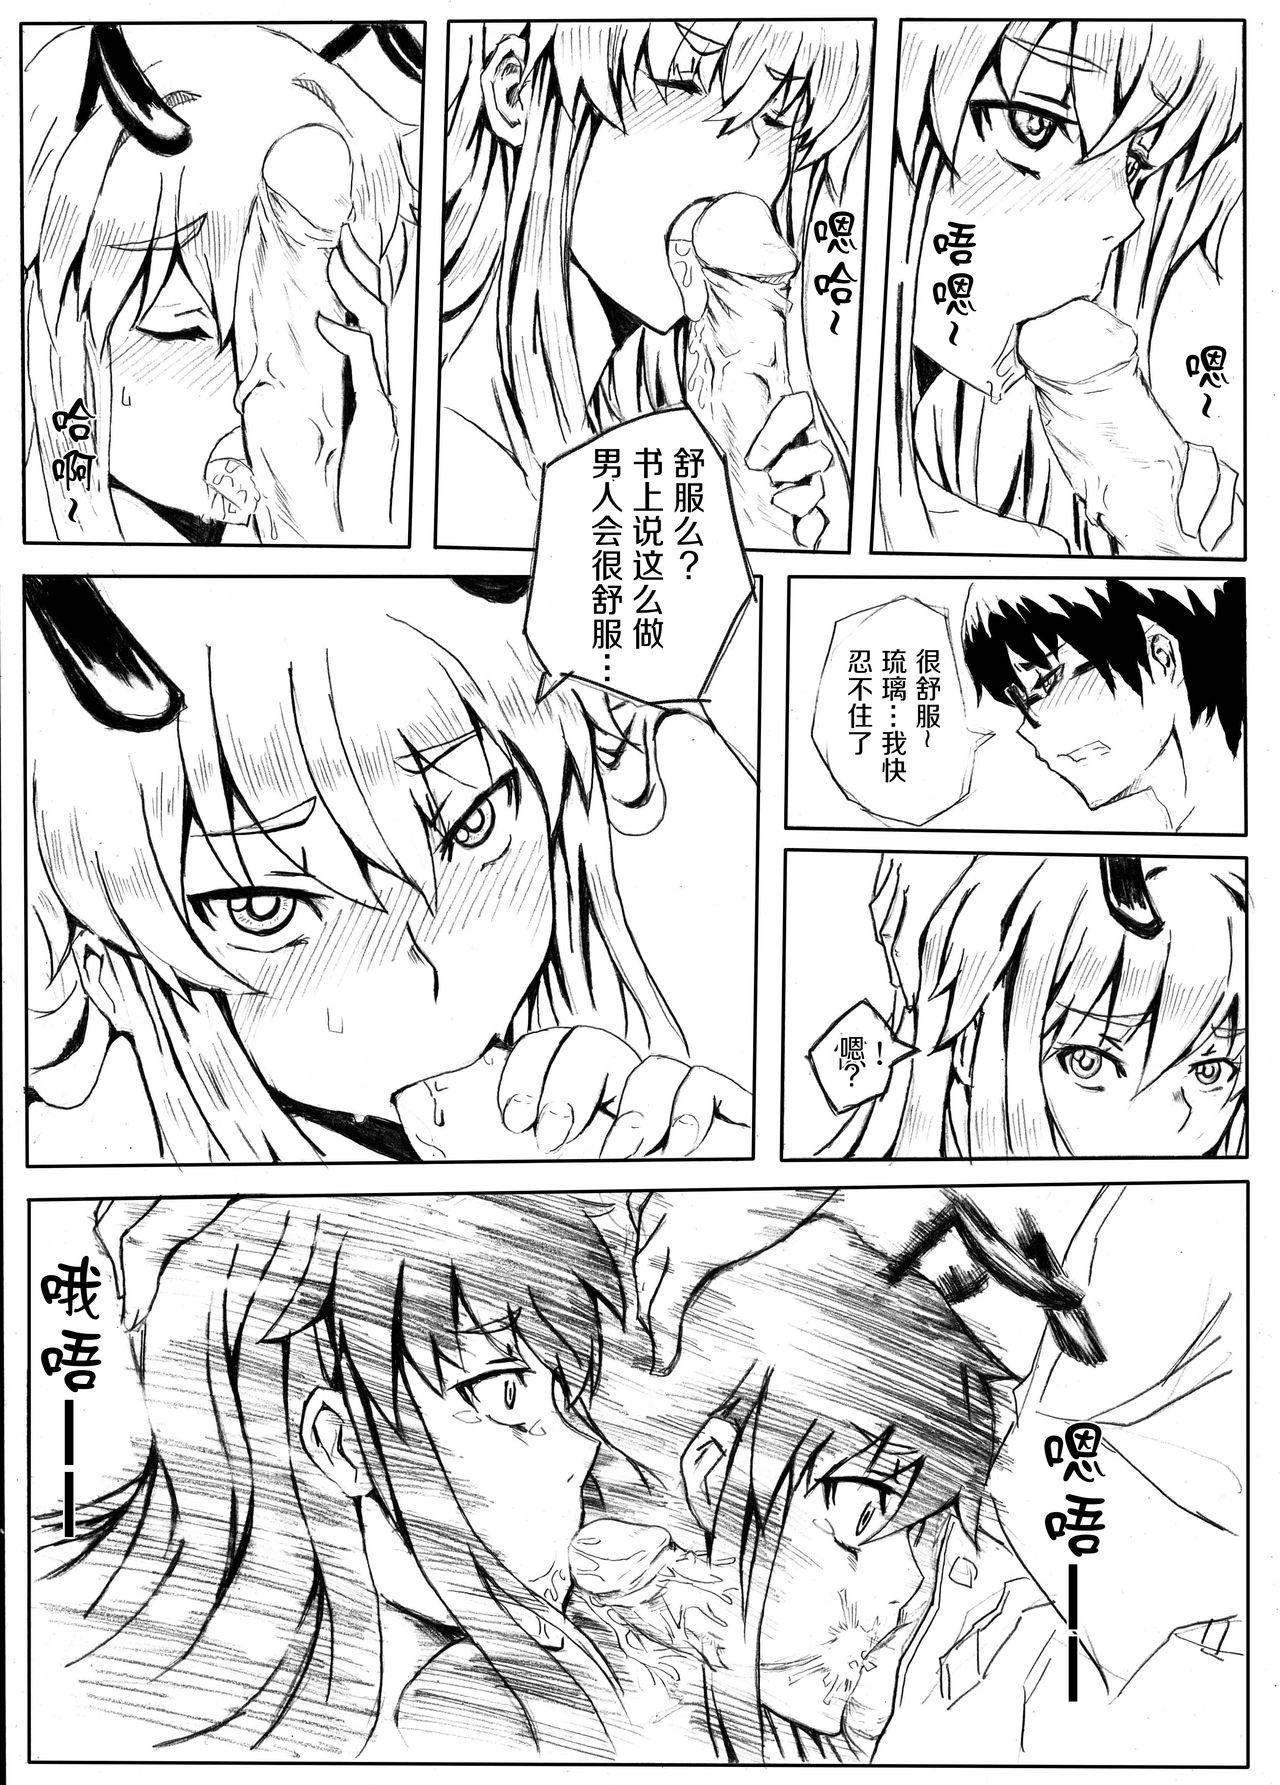 College [Shuseikan(Chinese Animation-School Shock)] Don`t Leave Me Alone 201108 [Chinese]（不想记名汉化） - School shock Caught - Page 10